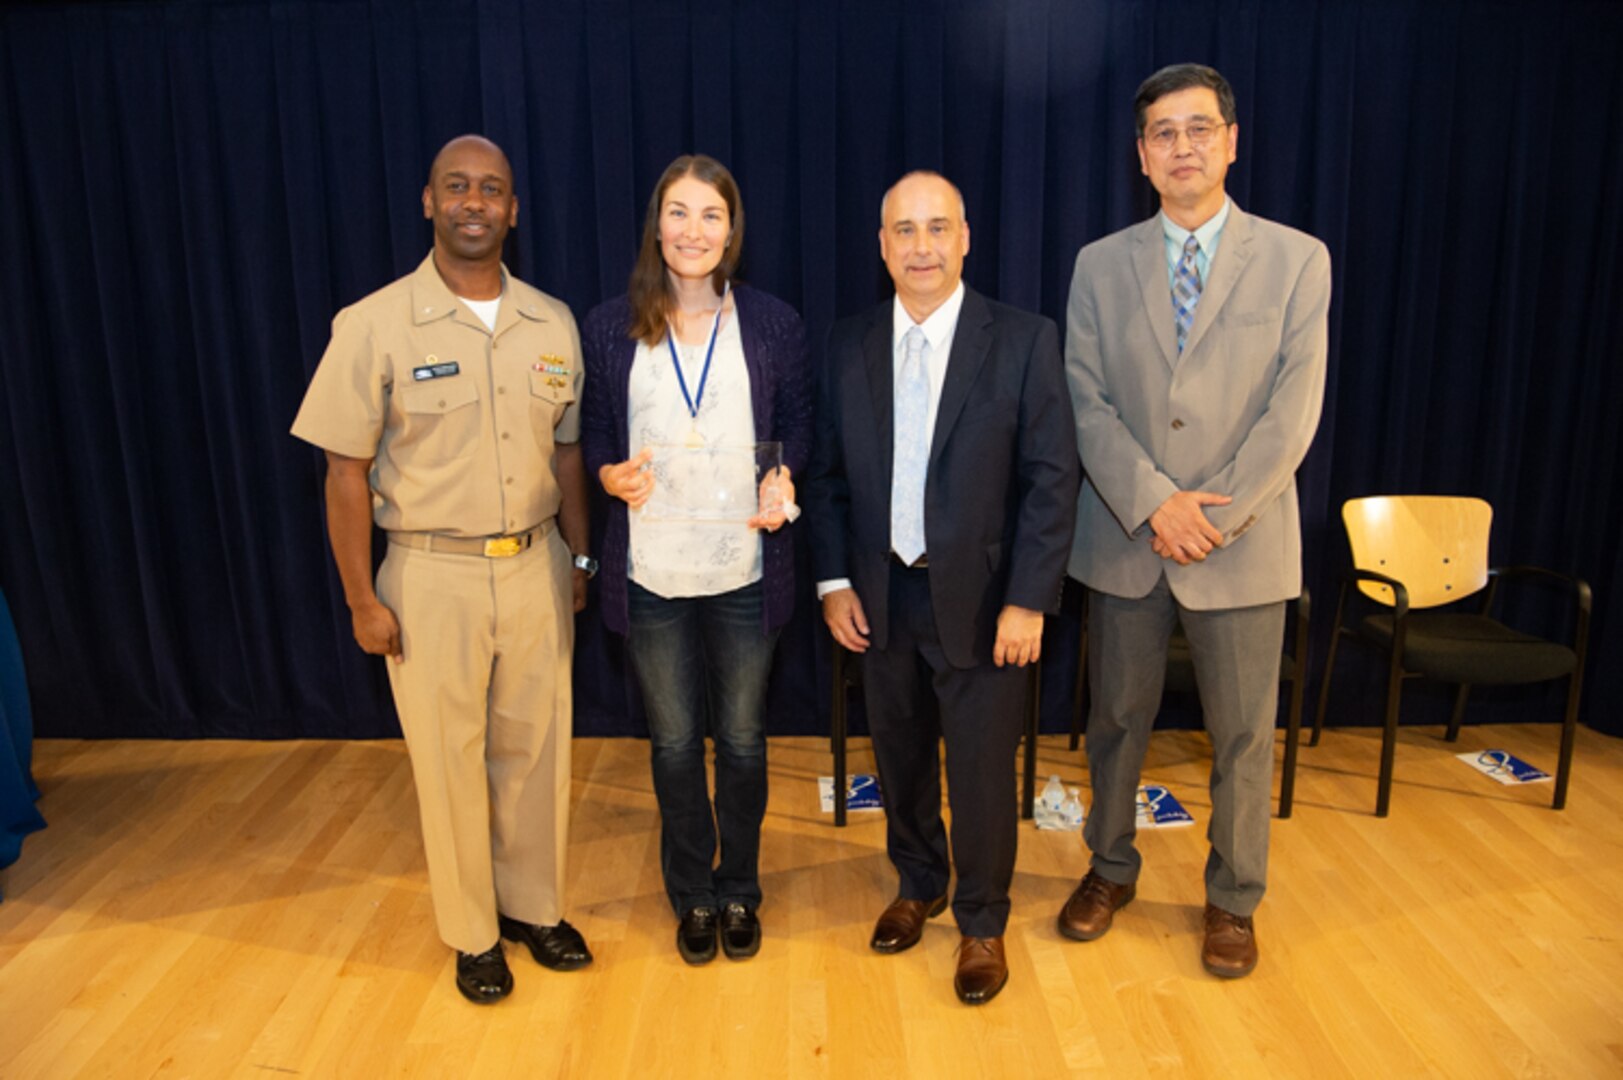 River Clemens, a scientist at the Acoustic Research Detachment, receives the Vice Adm. Samuel Gravely Award the Naval Surface Warfare Center, Carderock Division Honor Awards on Sept. 10, 2019, in West Bethesda, Md. With Clemens is Commanding Officer Capt. Cedric McNeal, Technical Director Larry Tarasek and Ship Signatures Department Head Dr. Paul Shang. (U.S. Navy photo by Nicholas Brezzell/Released)